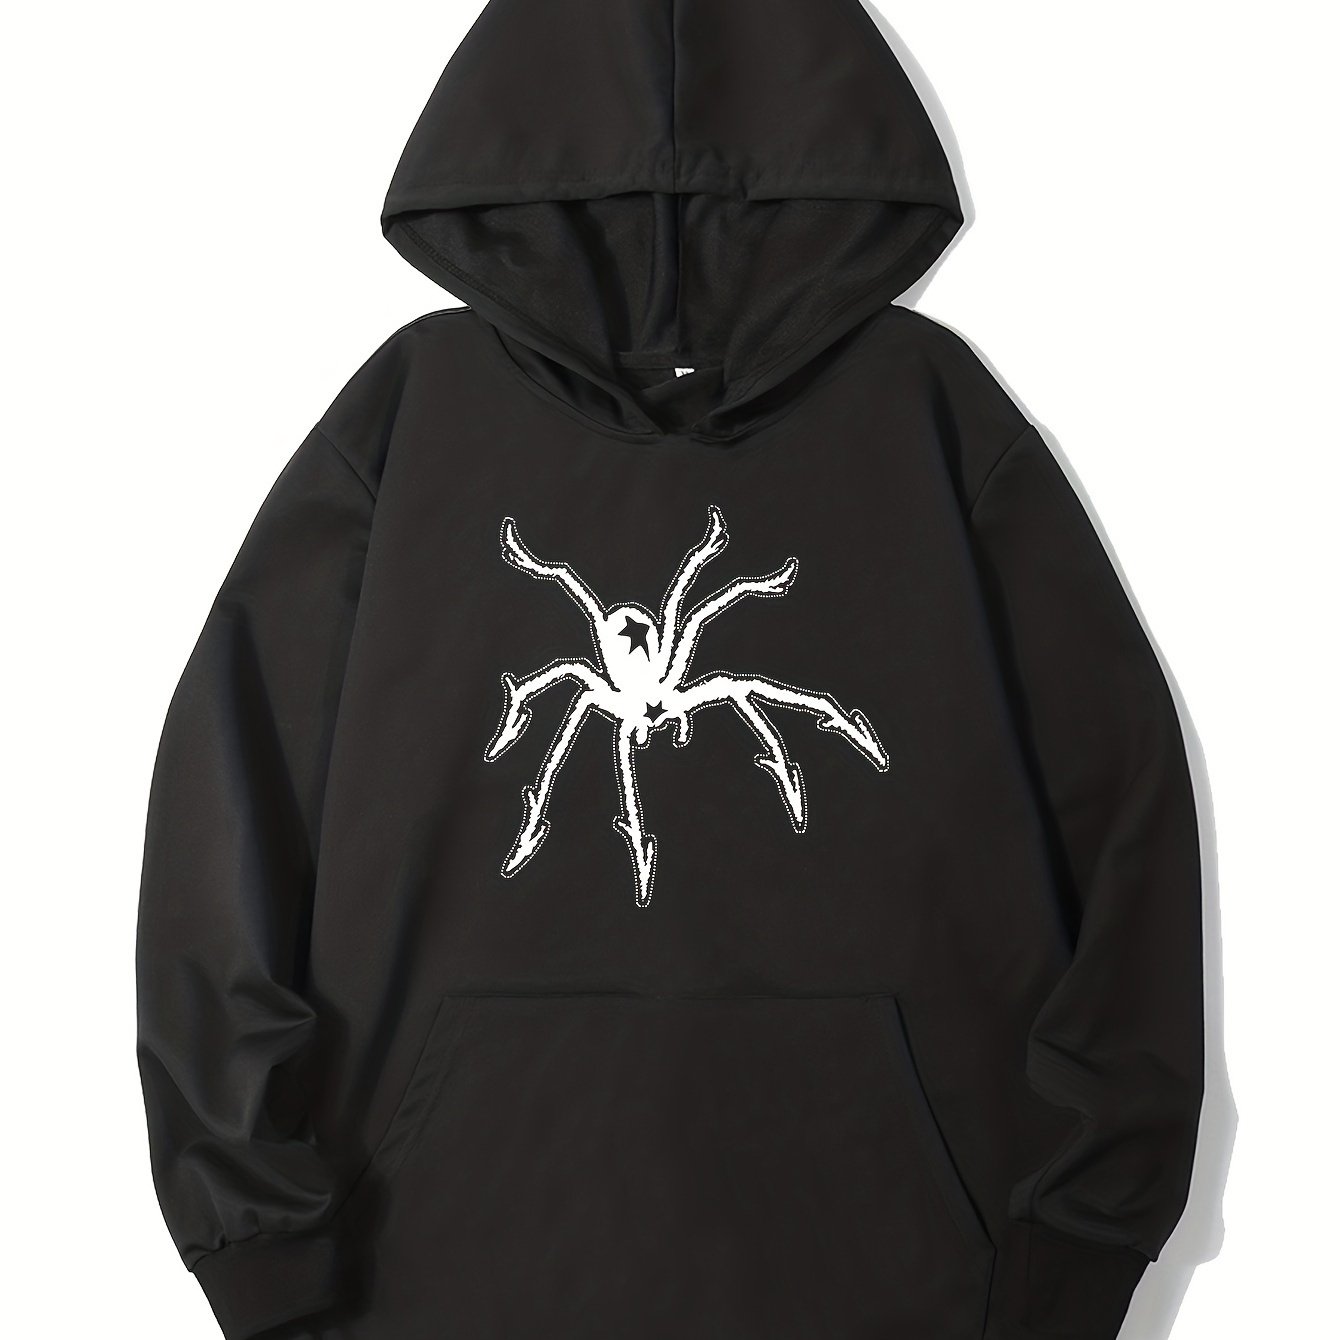 

Spider Print Hoodie, Cool Hoodies For Men, Men's Casual Graphic Design Pullover Hooded Sweatshirt With Kangaroo Pocket Streetwear For Winter Fall, As Gifts